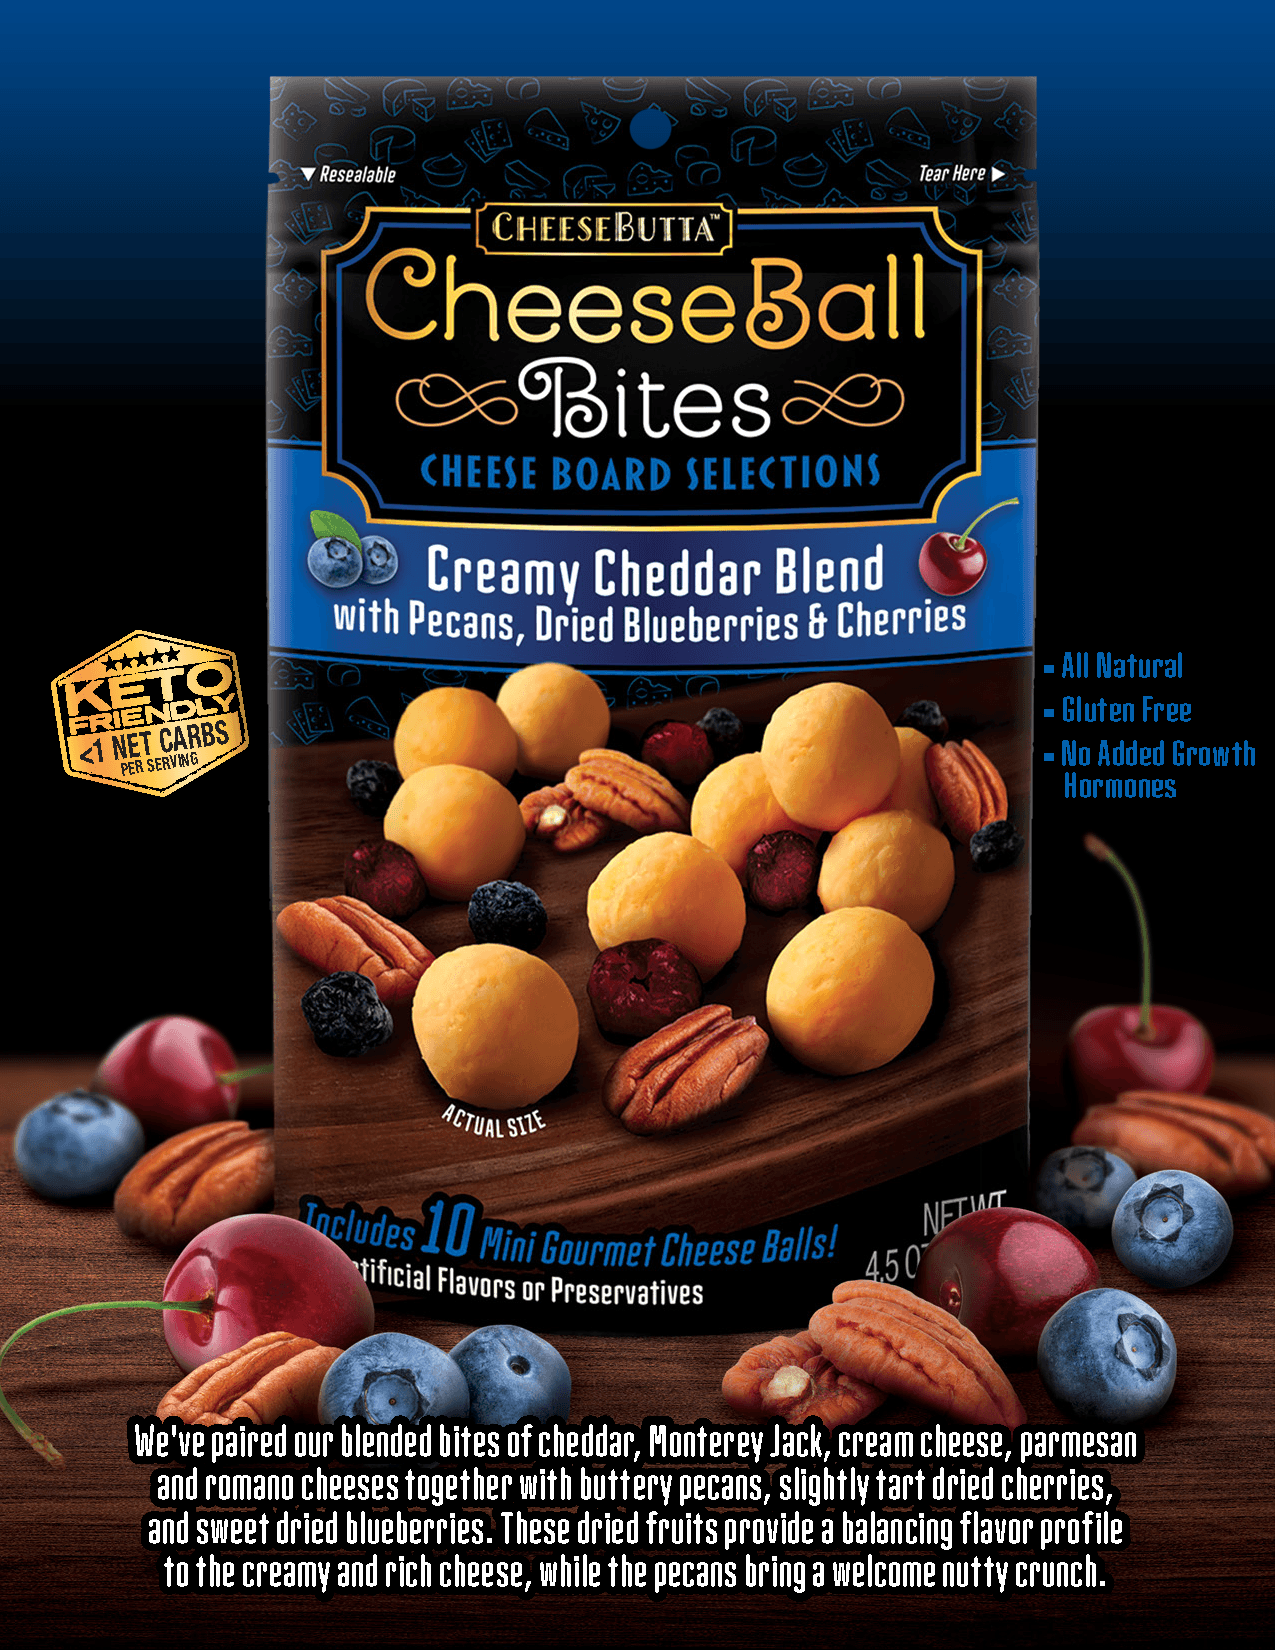 Creamy Cheddar Blend with Blueberries, Cherries & Pecans - CheeseButta - Gourmet Products